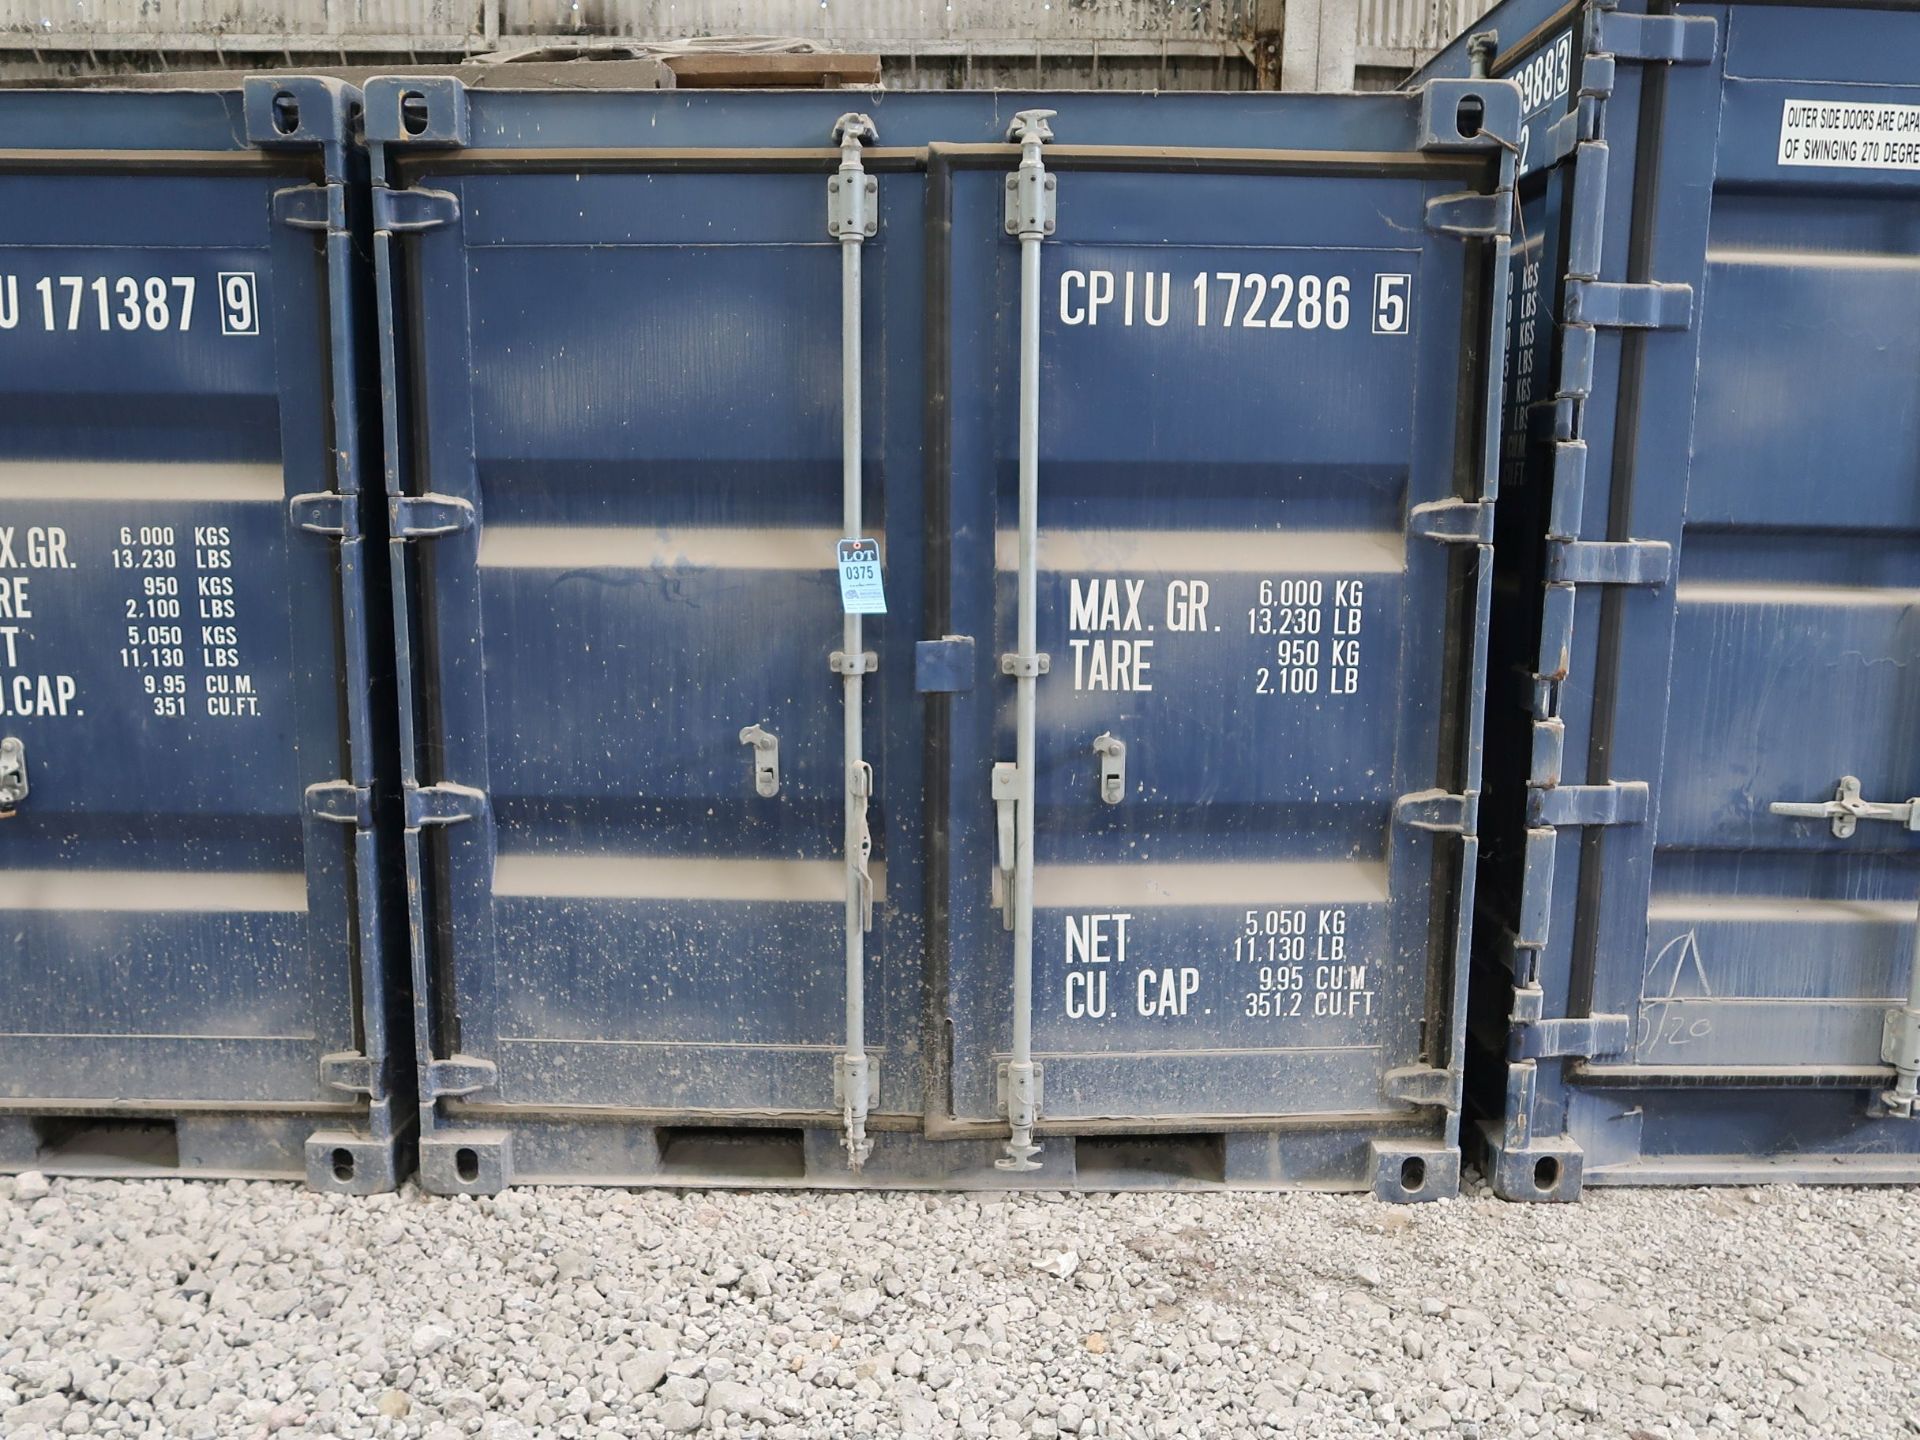 7' WIDE X 8' LONG CONTAINER PROVIDER INTL CONEX STORAGE CONTAINER WITH STANDARD DOOR, 351 CU. FT.